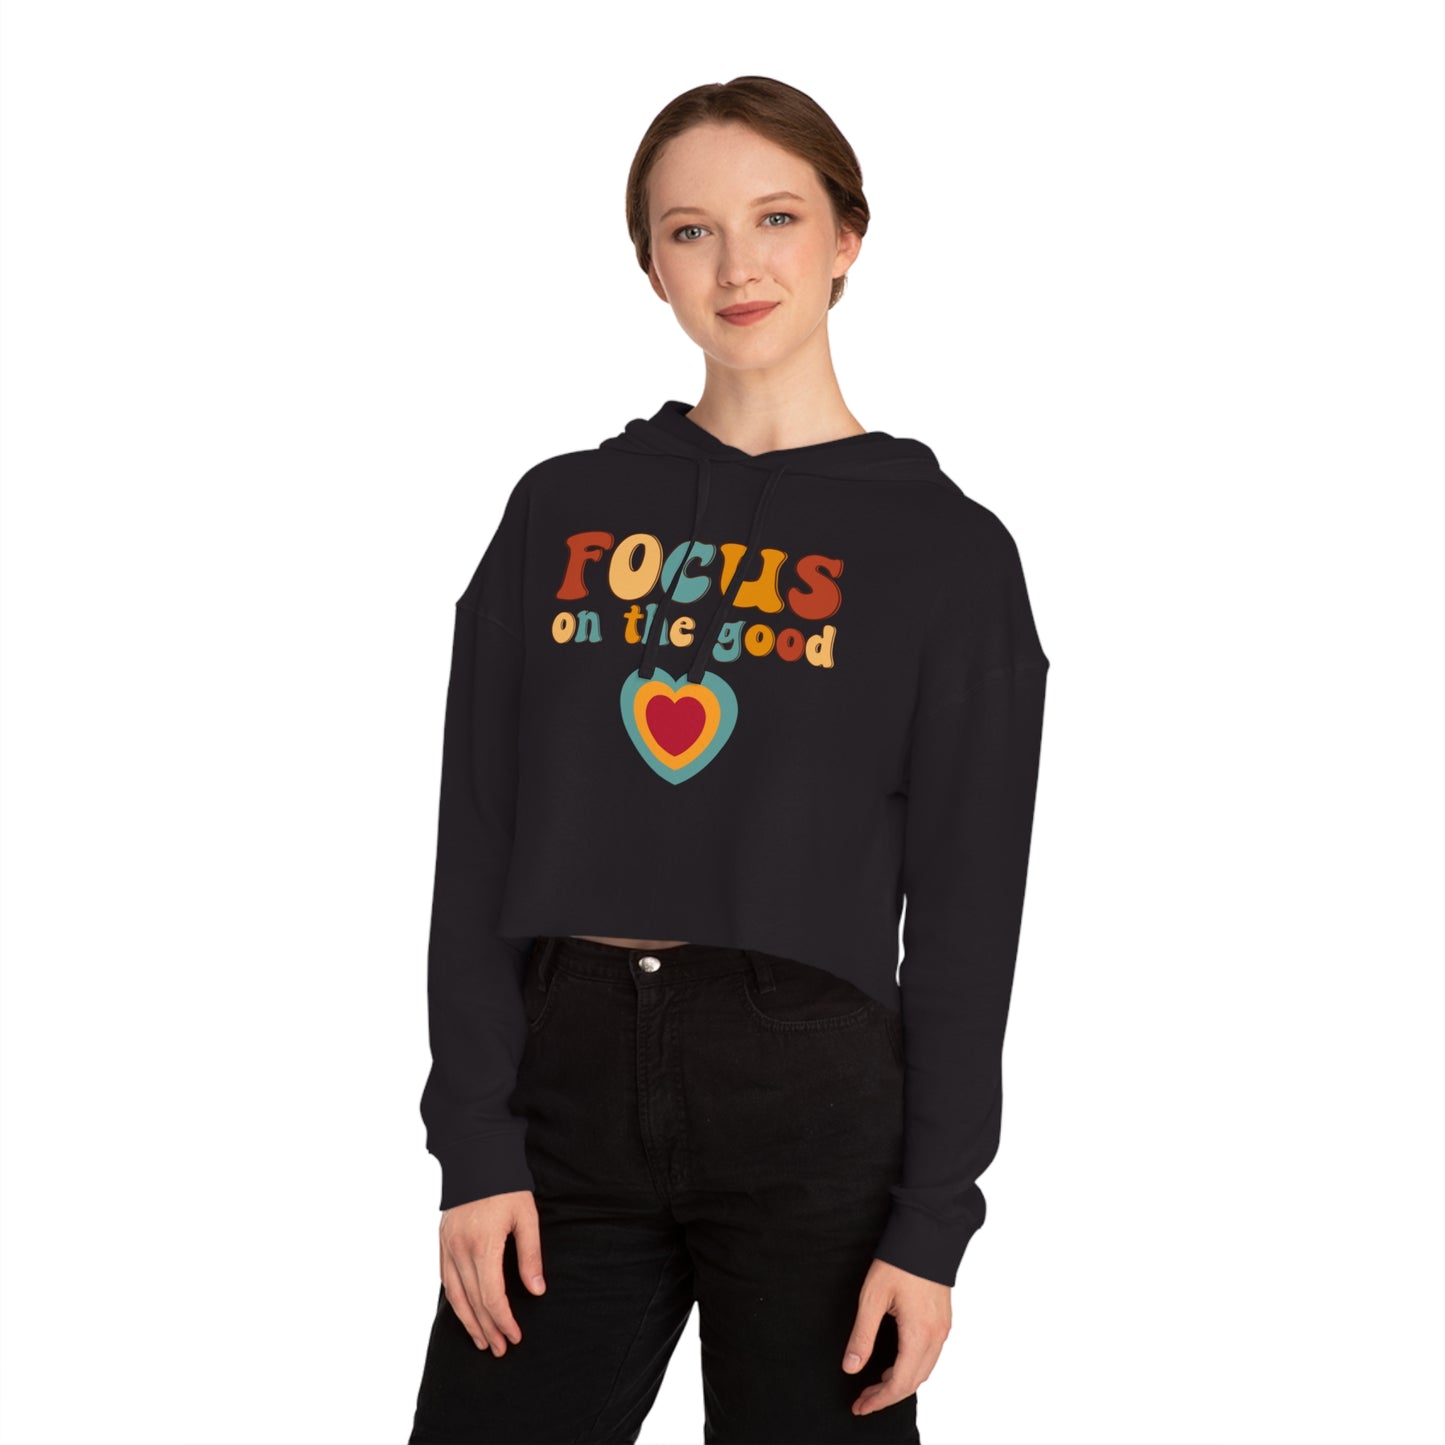 Colorful “Focus on the good” with a heart message design on this stylish Women’s Cropped Hooded Sweatshirt for your enjoyment.